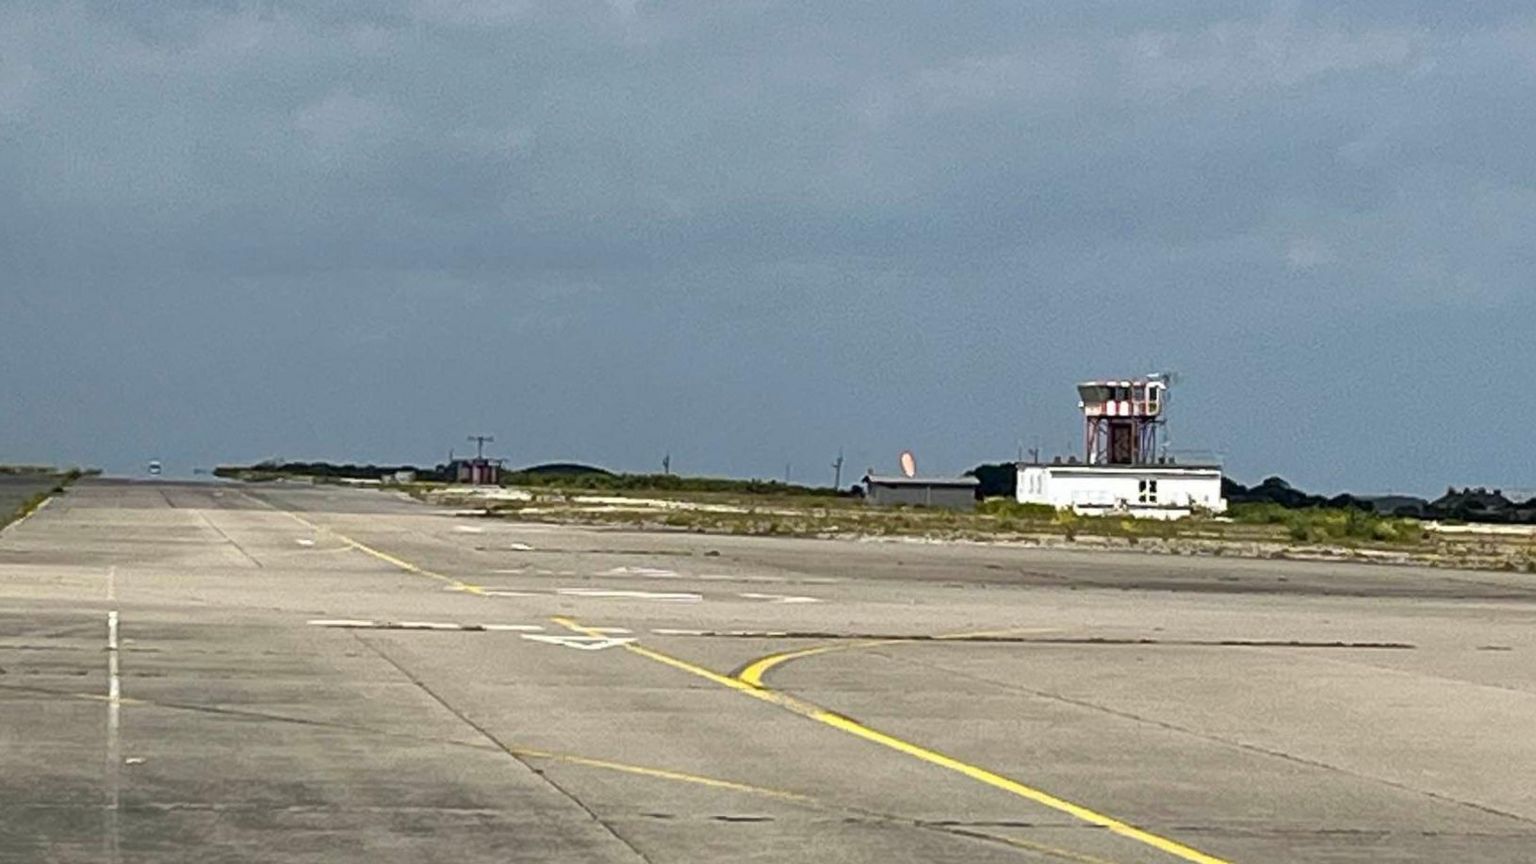 Control tower at Manston Airport